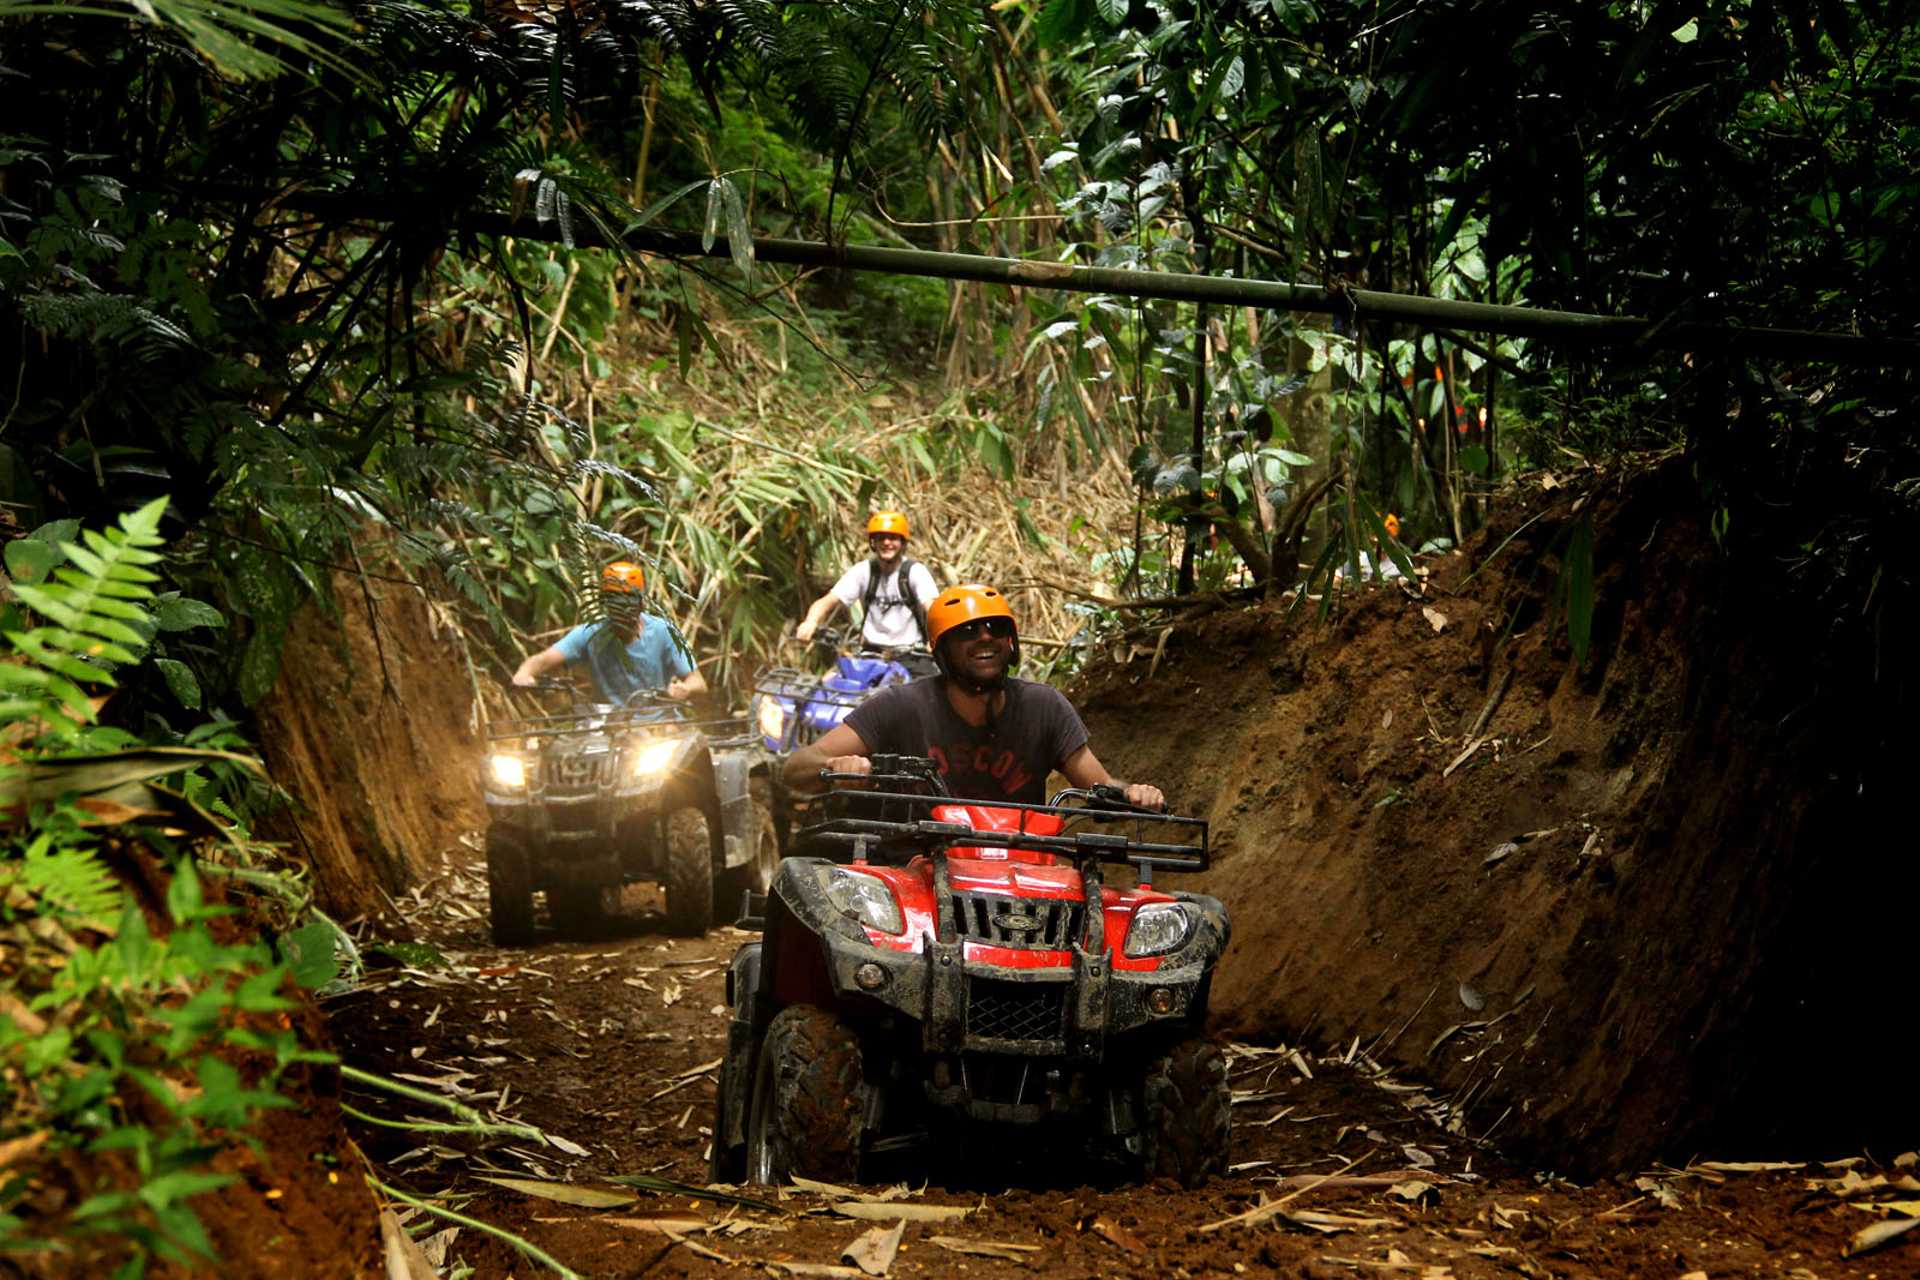 Full Day Bali Adventure Including Bali Swing and Quad Bikes 